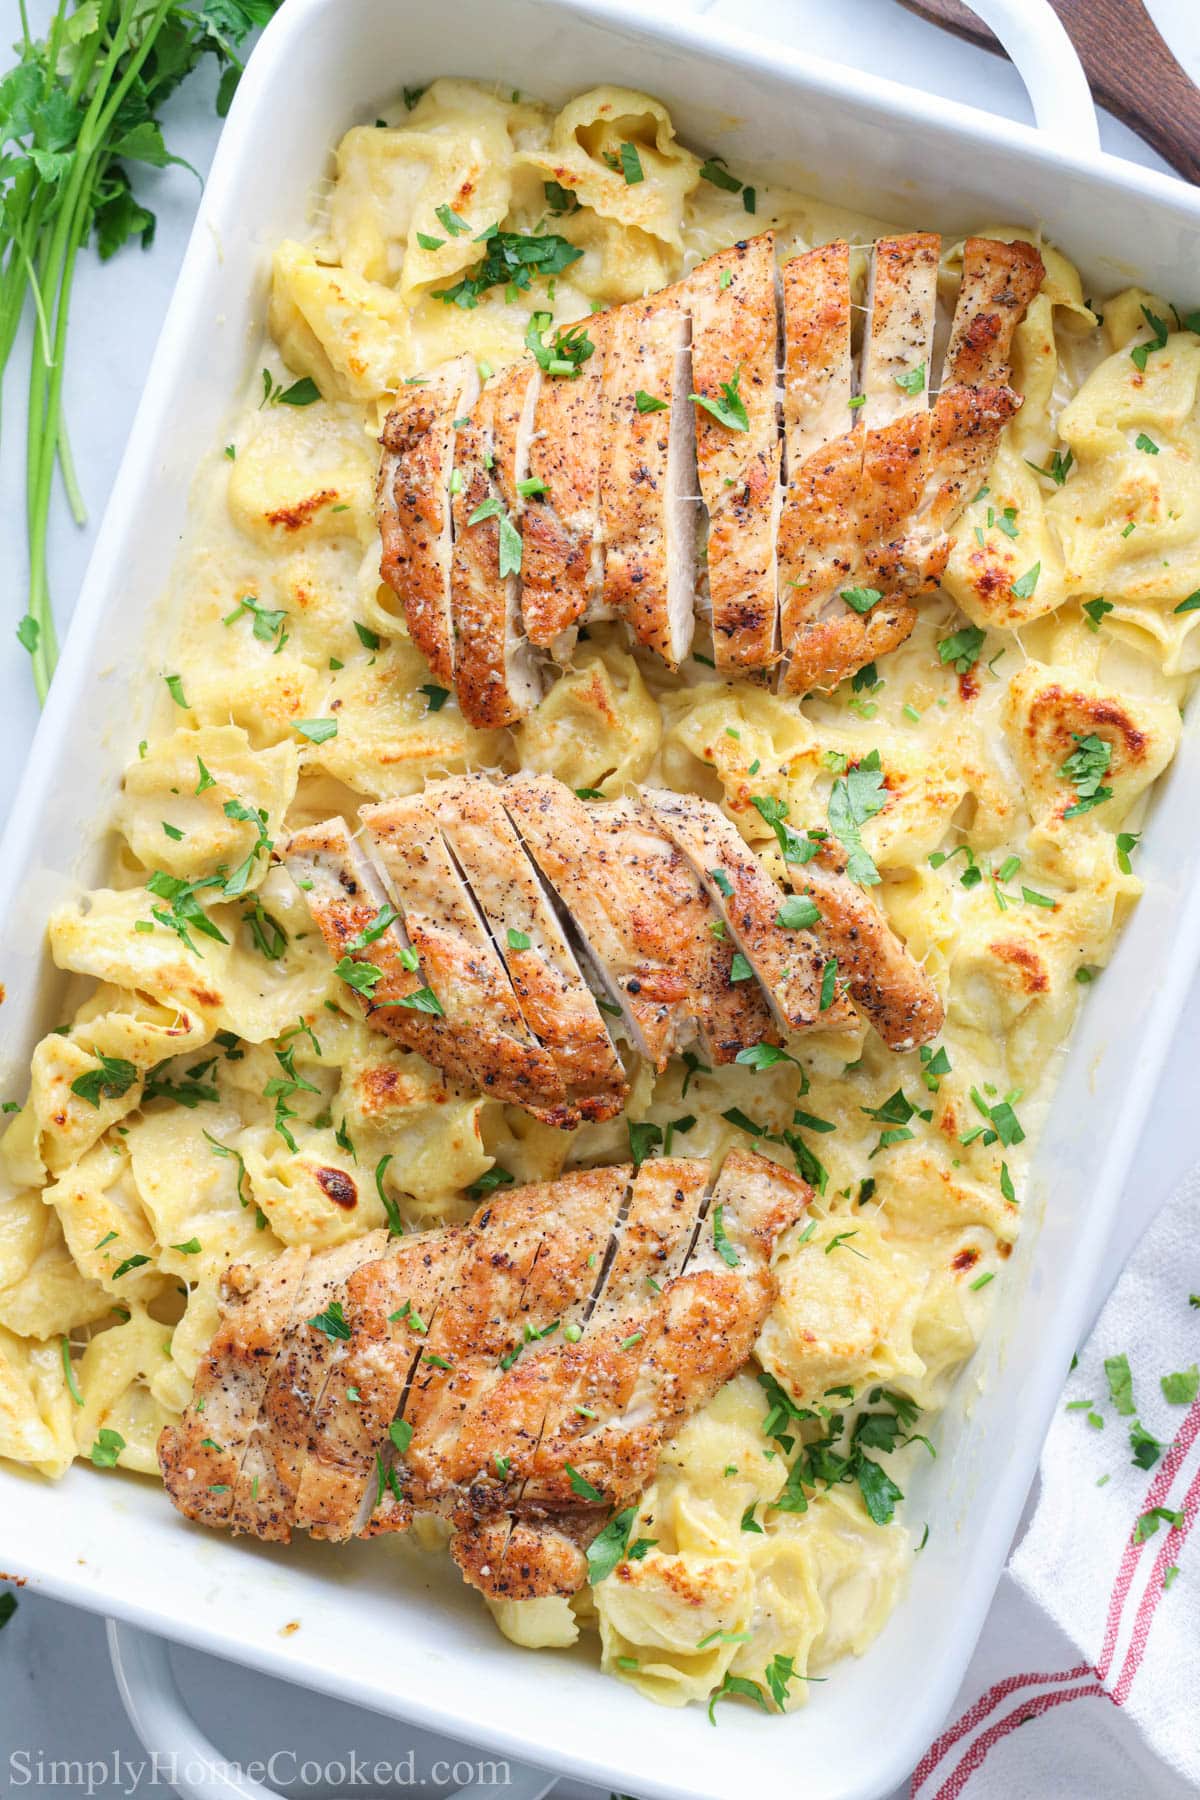 Asiago Tortelloni Alfredo with Grilled Chicken in a baking dish with parsley sprinkled on top